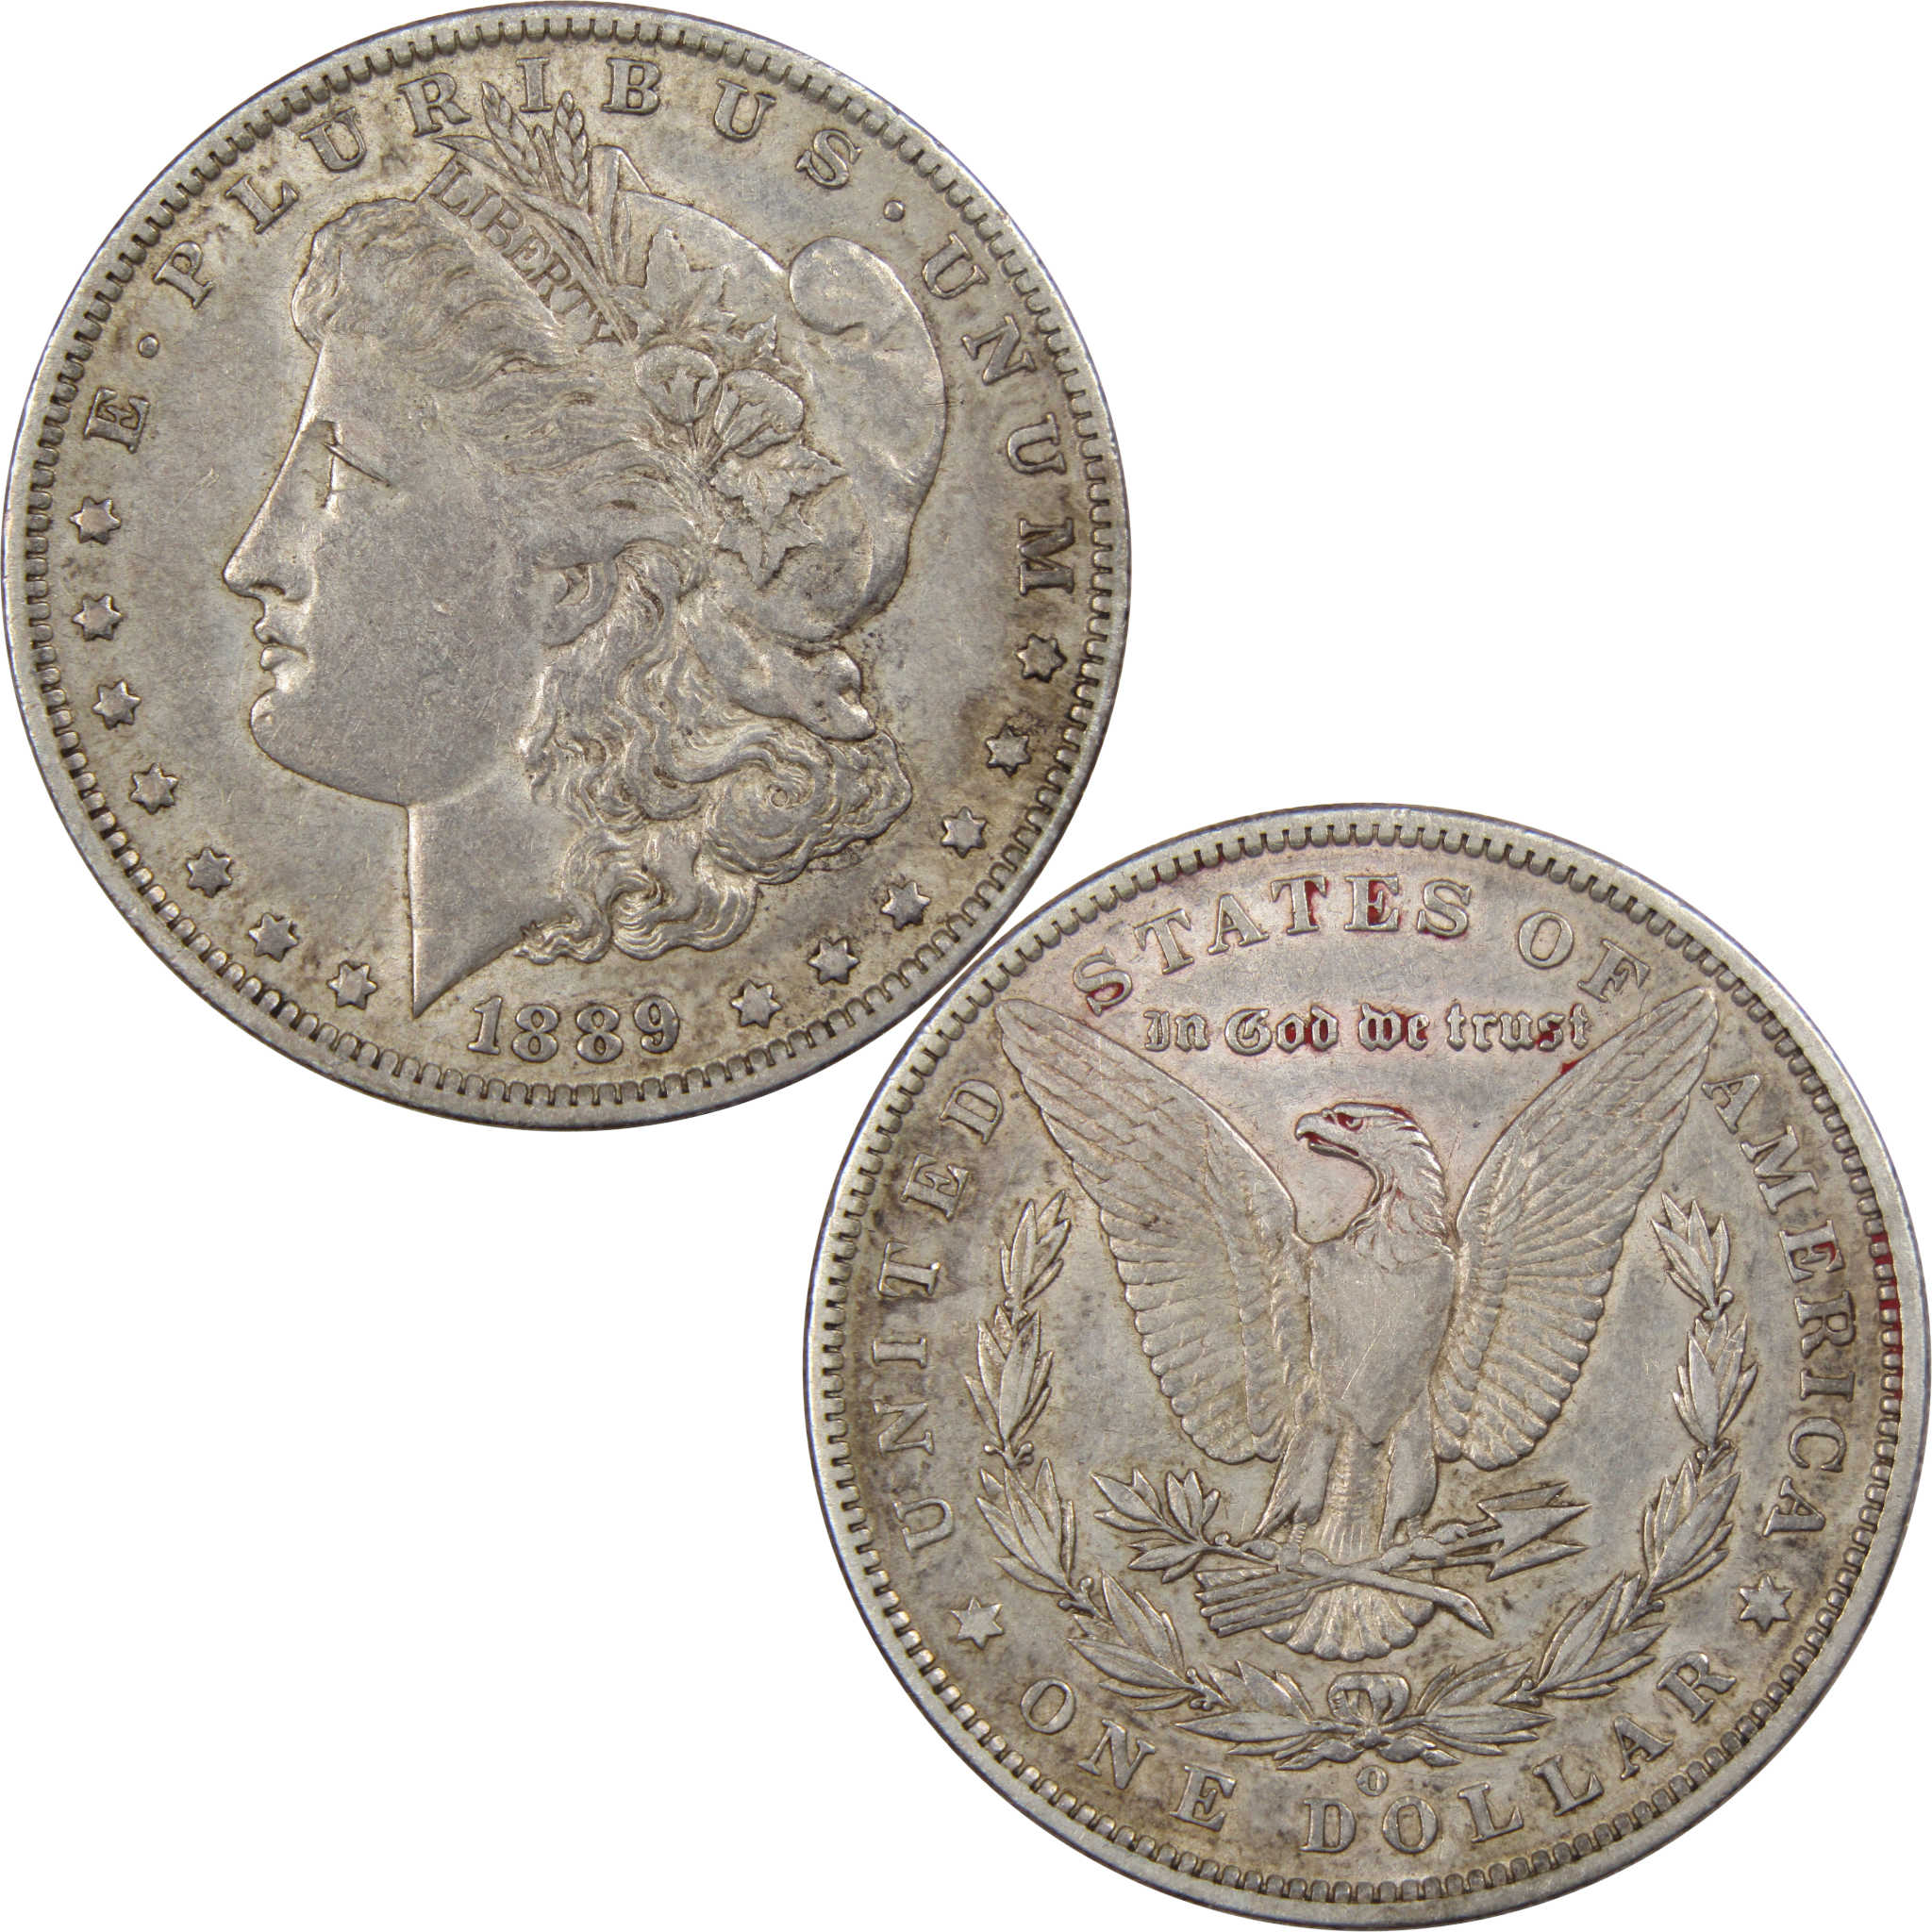 1889 O Morgan Dollar XF EF Extremely Fine 90% Silver Coin SKU:I1502 - Morgan coin - Morgan silver dollar - Morgan silver dollar for sale - Profile Coins &amp; Collectibles